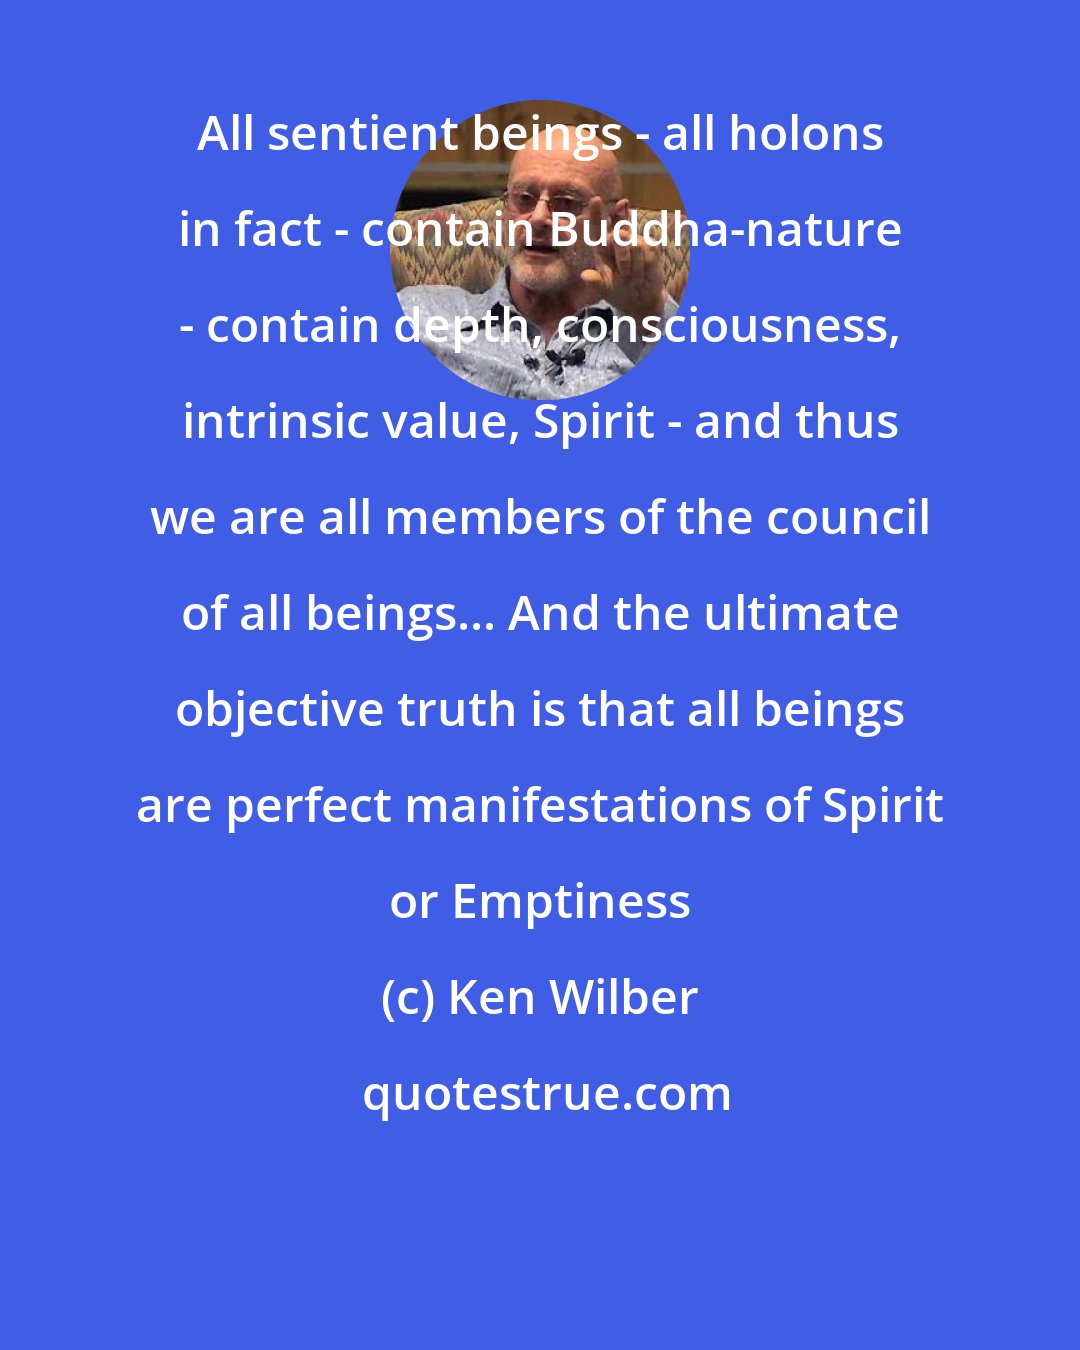 Ken Wilber: All sentient beings - all holons in fact - contain Buddha-nature - contain depth, consciousness, intrinsic value, Spirit - and thus we are all members of the council of all beings... And the ultimate objective truth is that all beings are perfect manifestations of Spirit or Emptiness